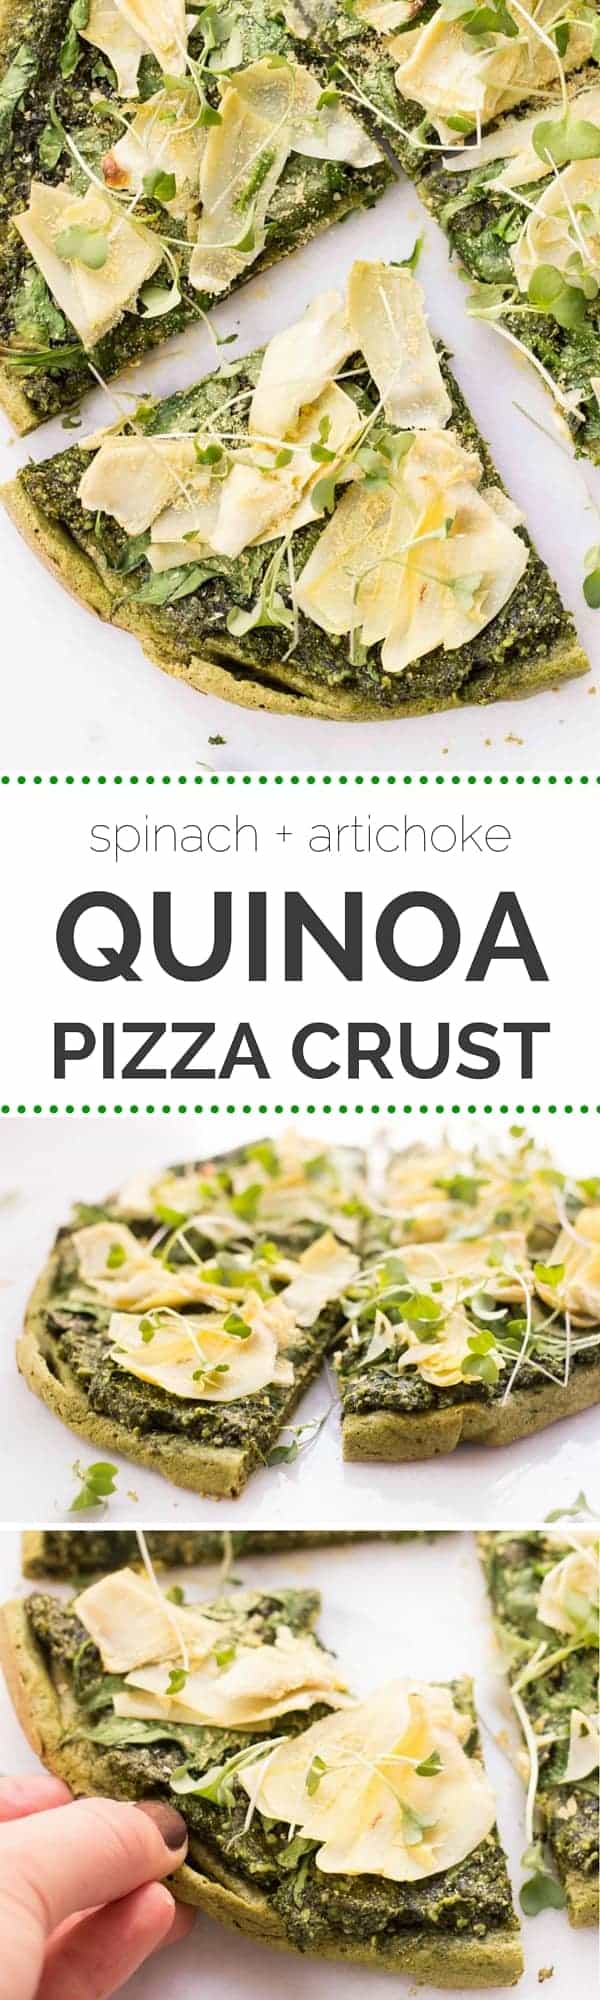 Pizza crust made out of QUINOA! Topped with pesto, spinach, artichokes and nutritional yeast for a nice cheesy flavor {gluten-free + vegan}